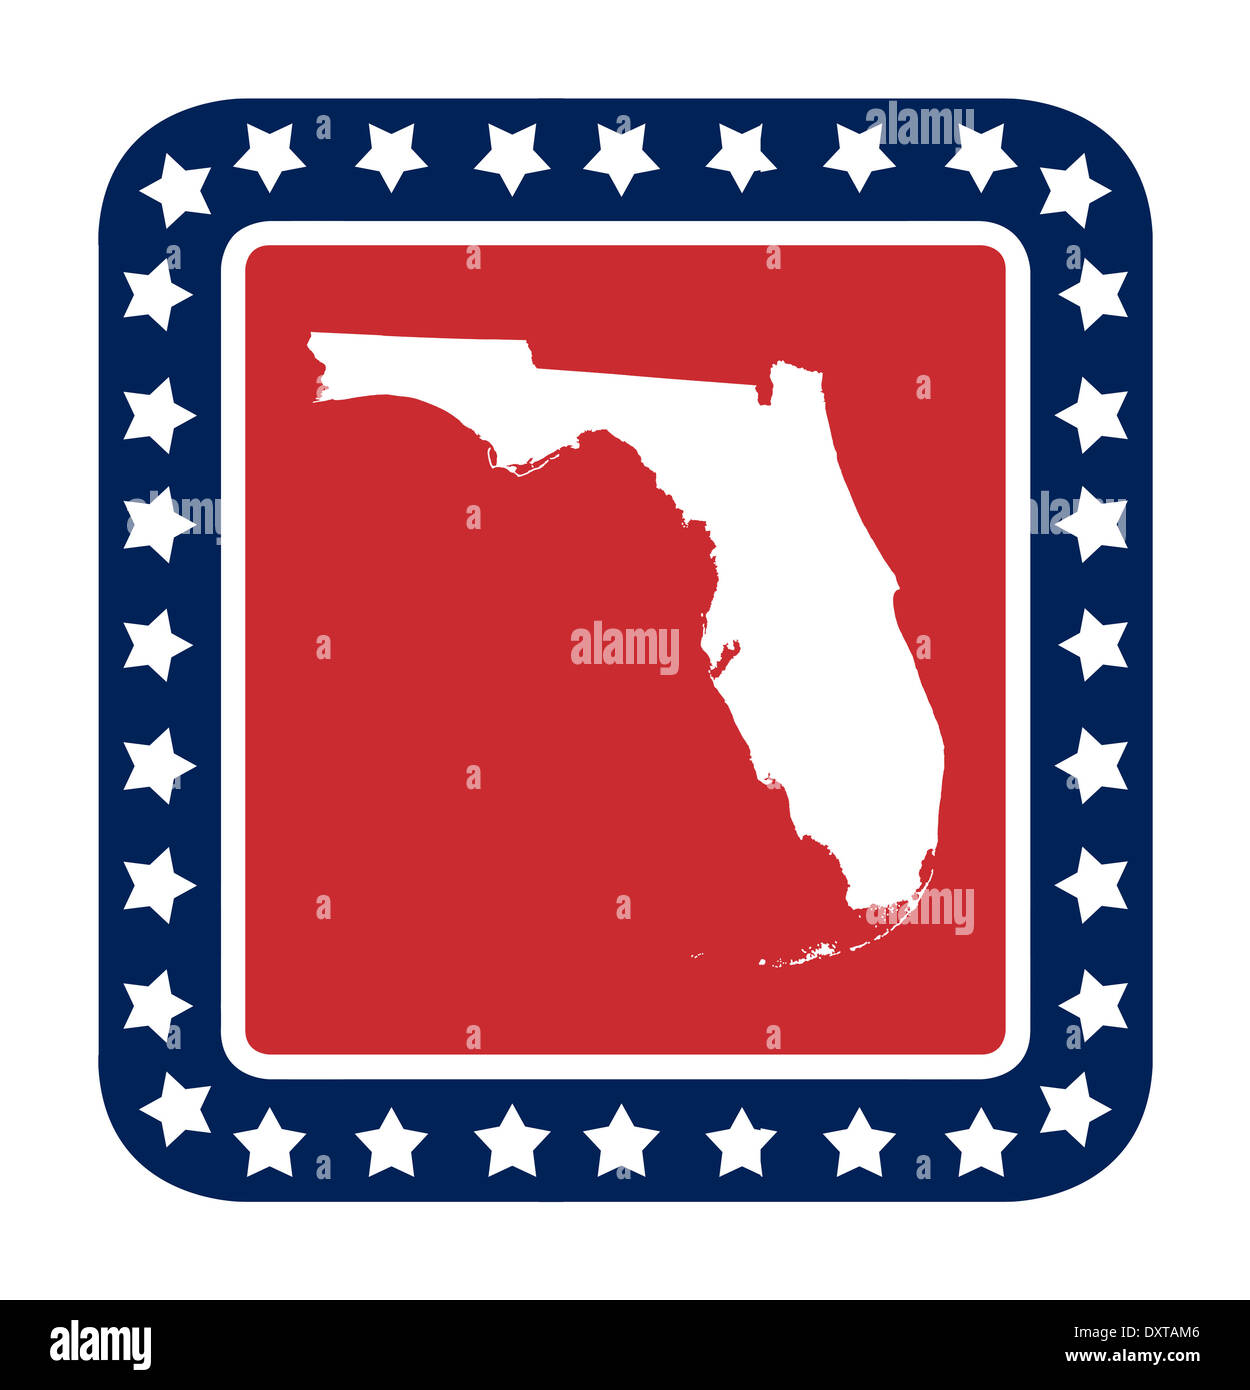 Florida state button on American flag in flat web design style, isolated on white background. Stock Photo